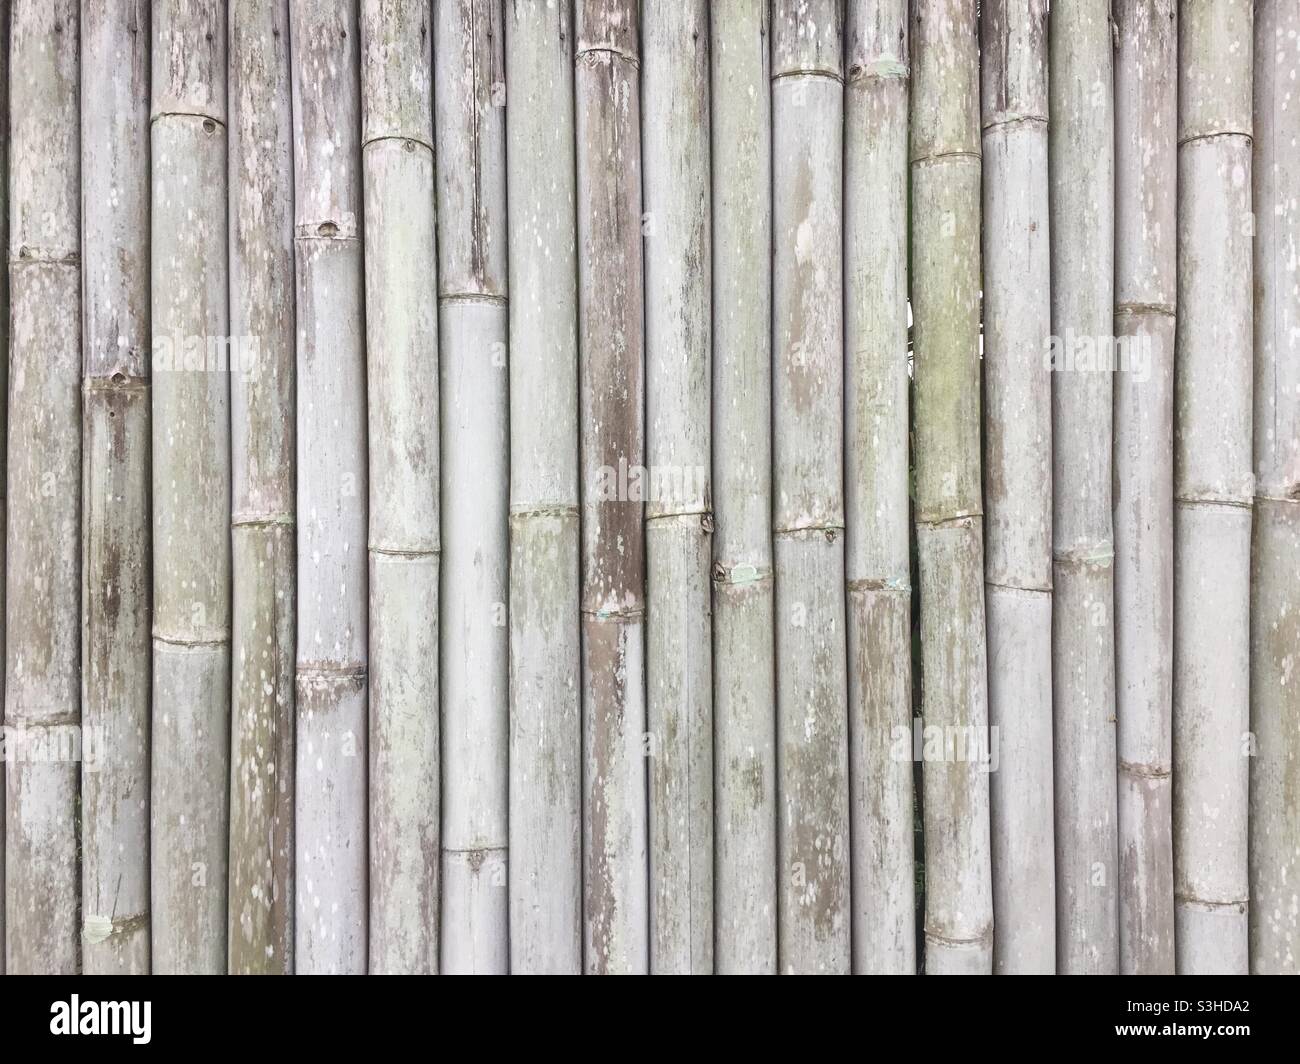 Bamboo texture material pattern Stock Photo - Alamy